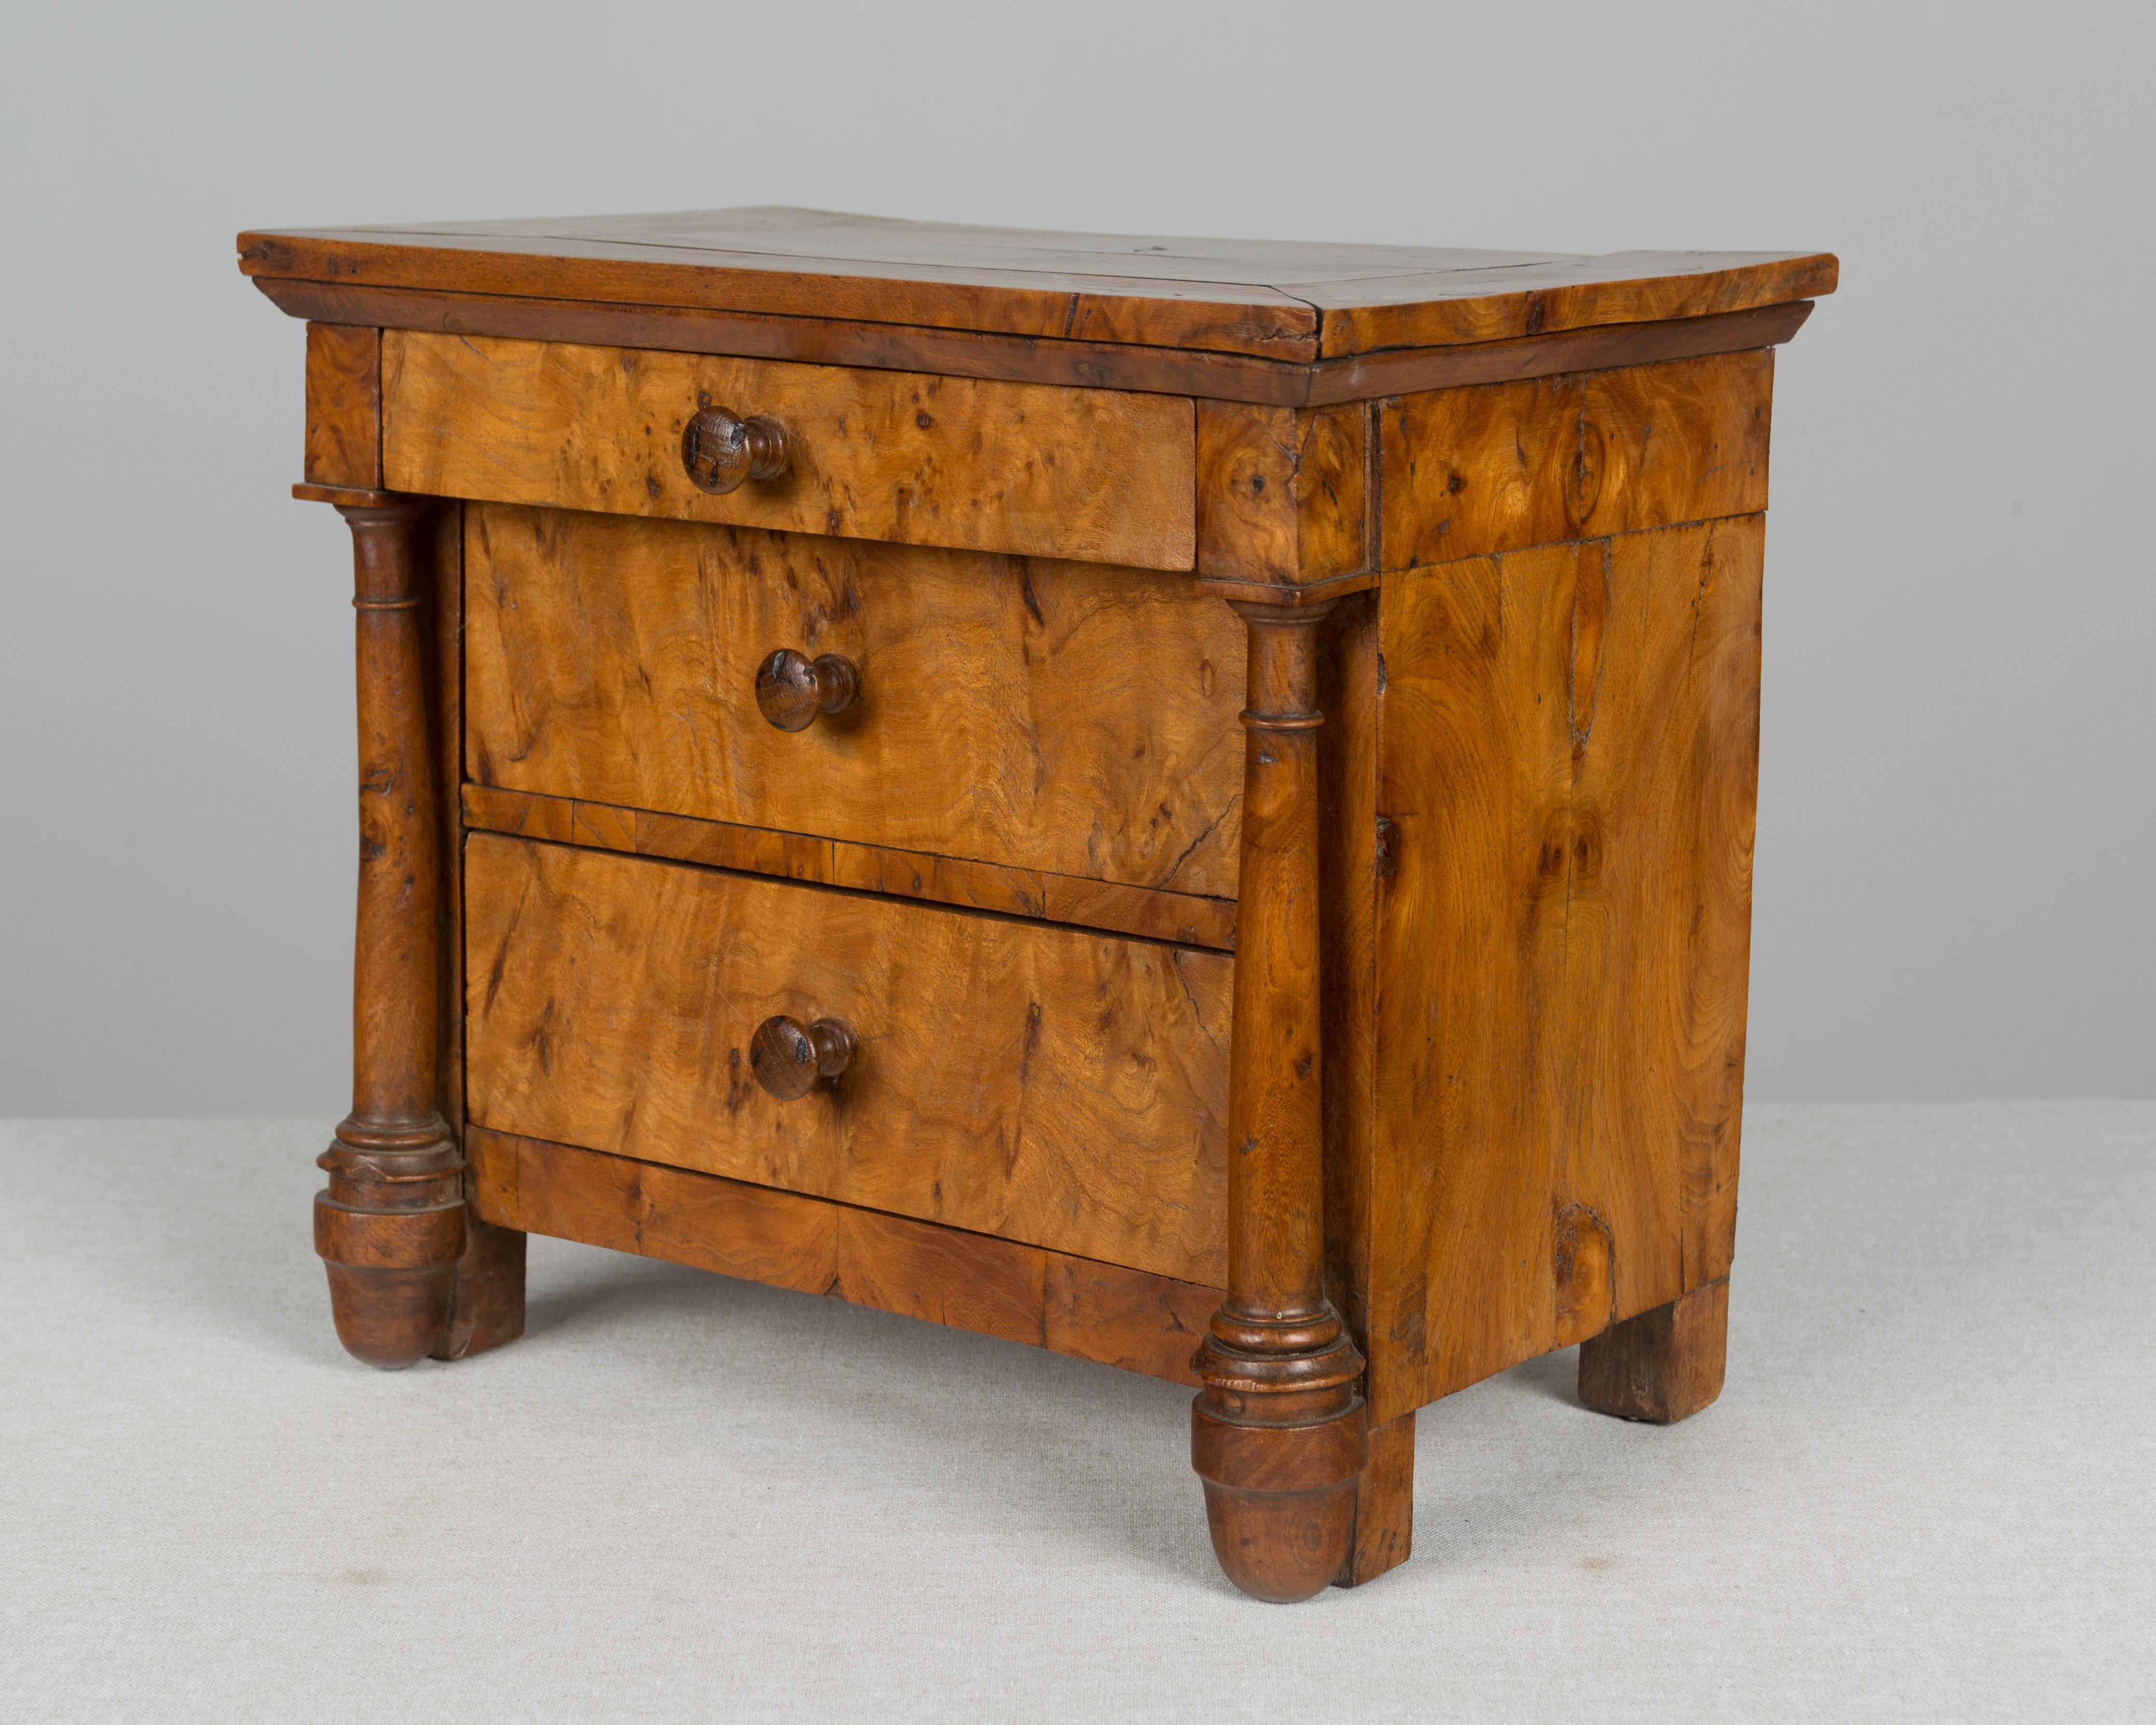 A 19th century French Empire miniature commode. A well executed miniature chest made of walnut and veneer of walnut with two large drawers below a smaller top drawer and with solid walnut columns. Inscription written in ink on the back of each of